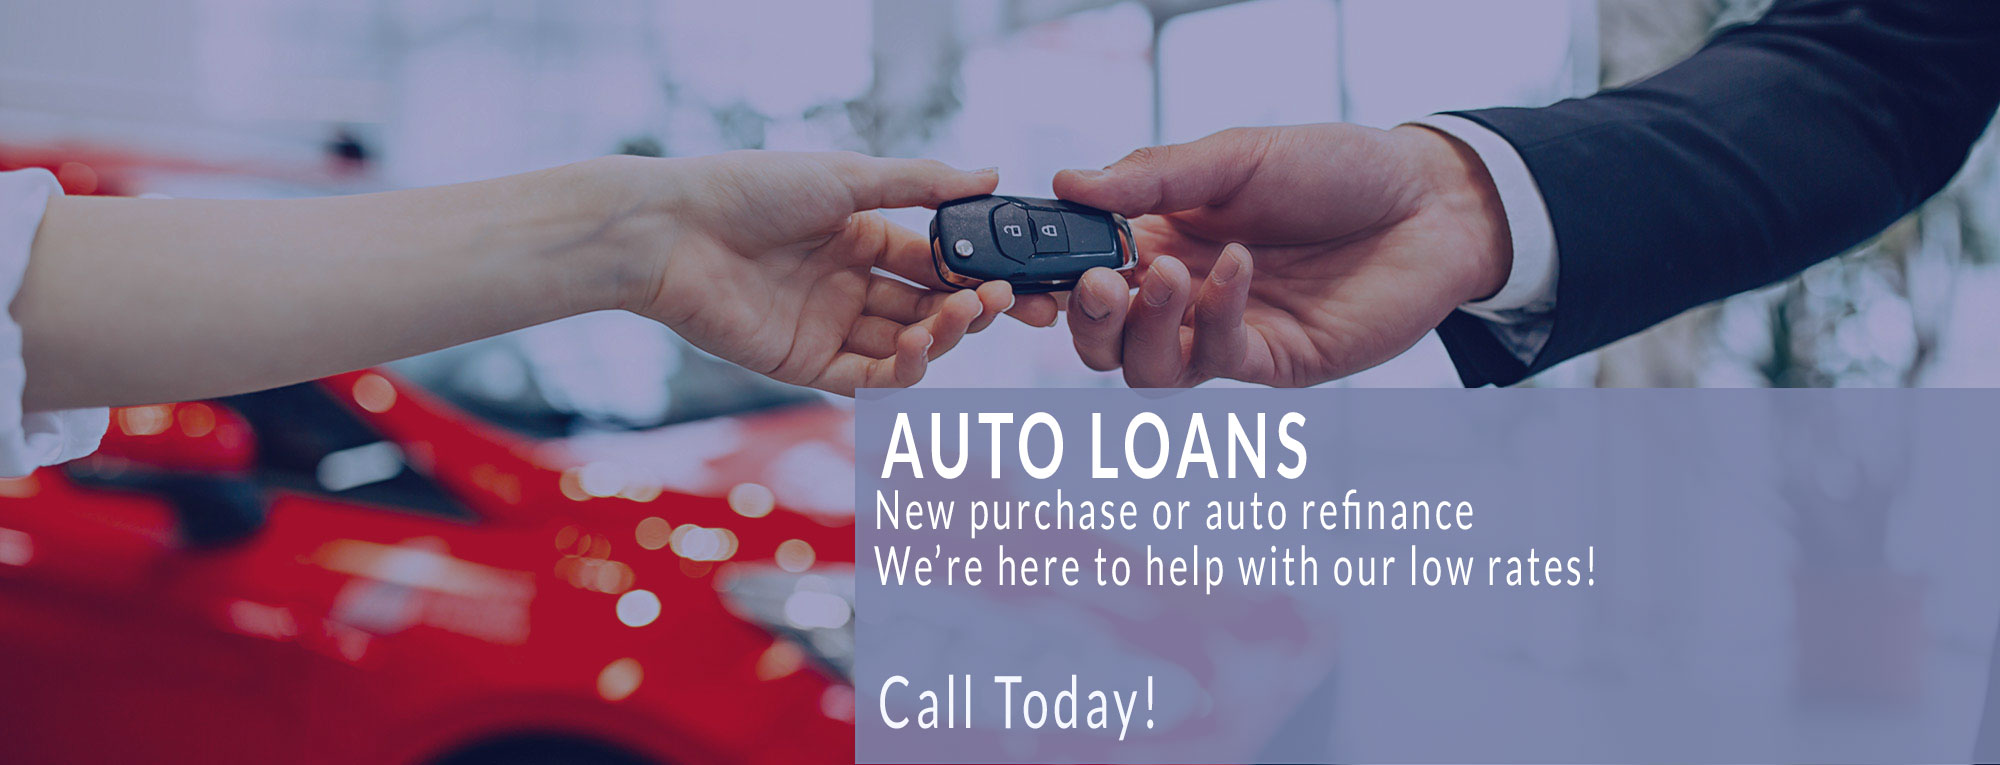 Auto Loans - New purchase or auto refinance. We're here to help with our low rates! Call Today!